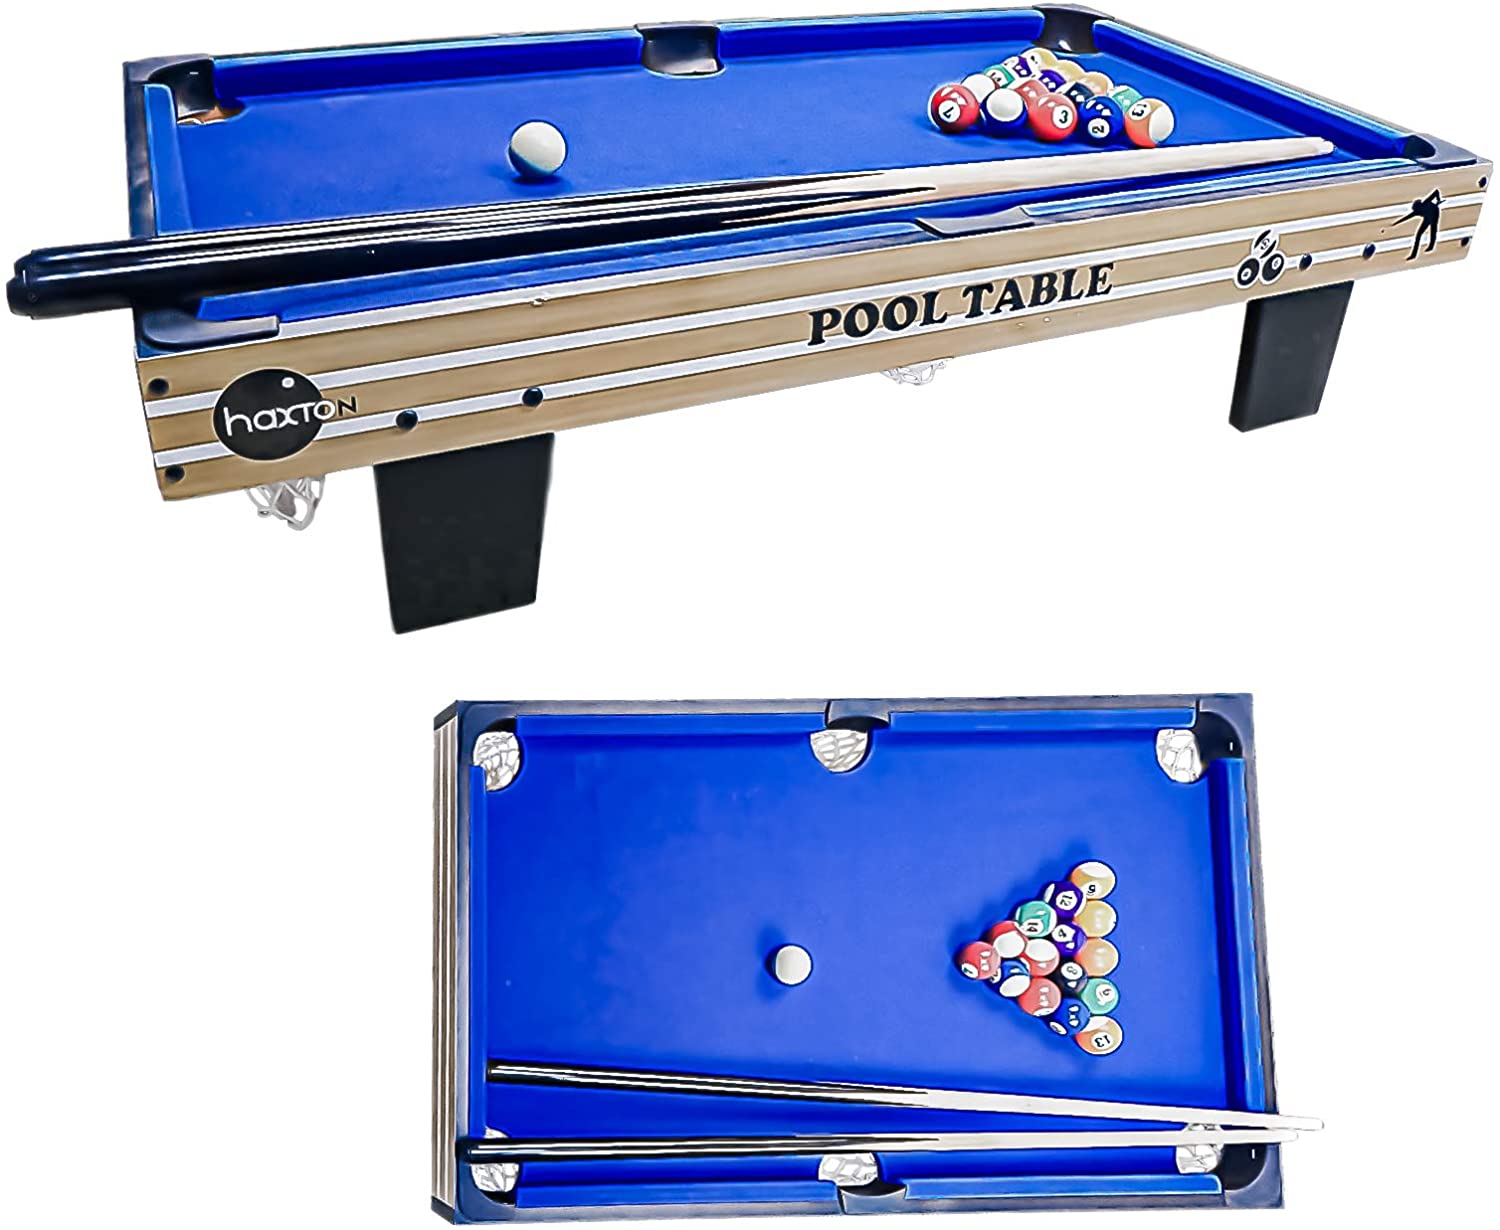 haxTON Tabletop Pool Table Set, Mini Pool Table,36”x20”x3.14”, Travel-Size Billiard Tables, Game Table, Pool Games, Cues, and Rack, Balls